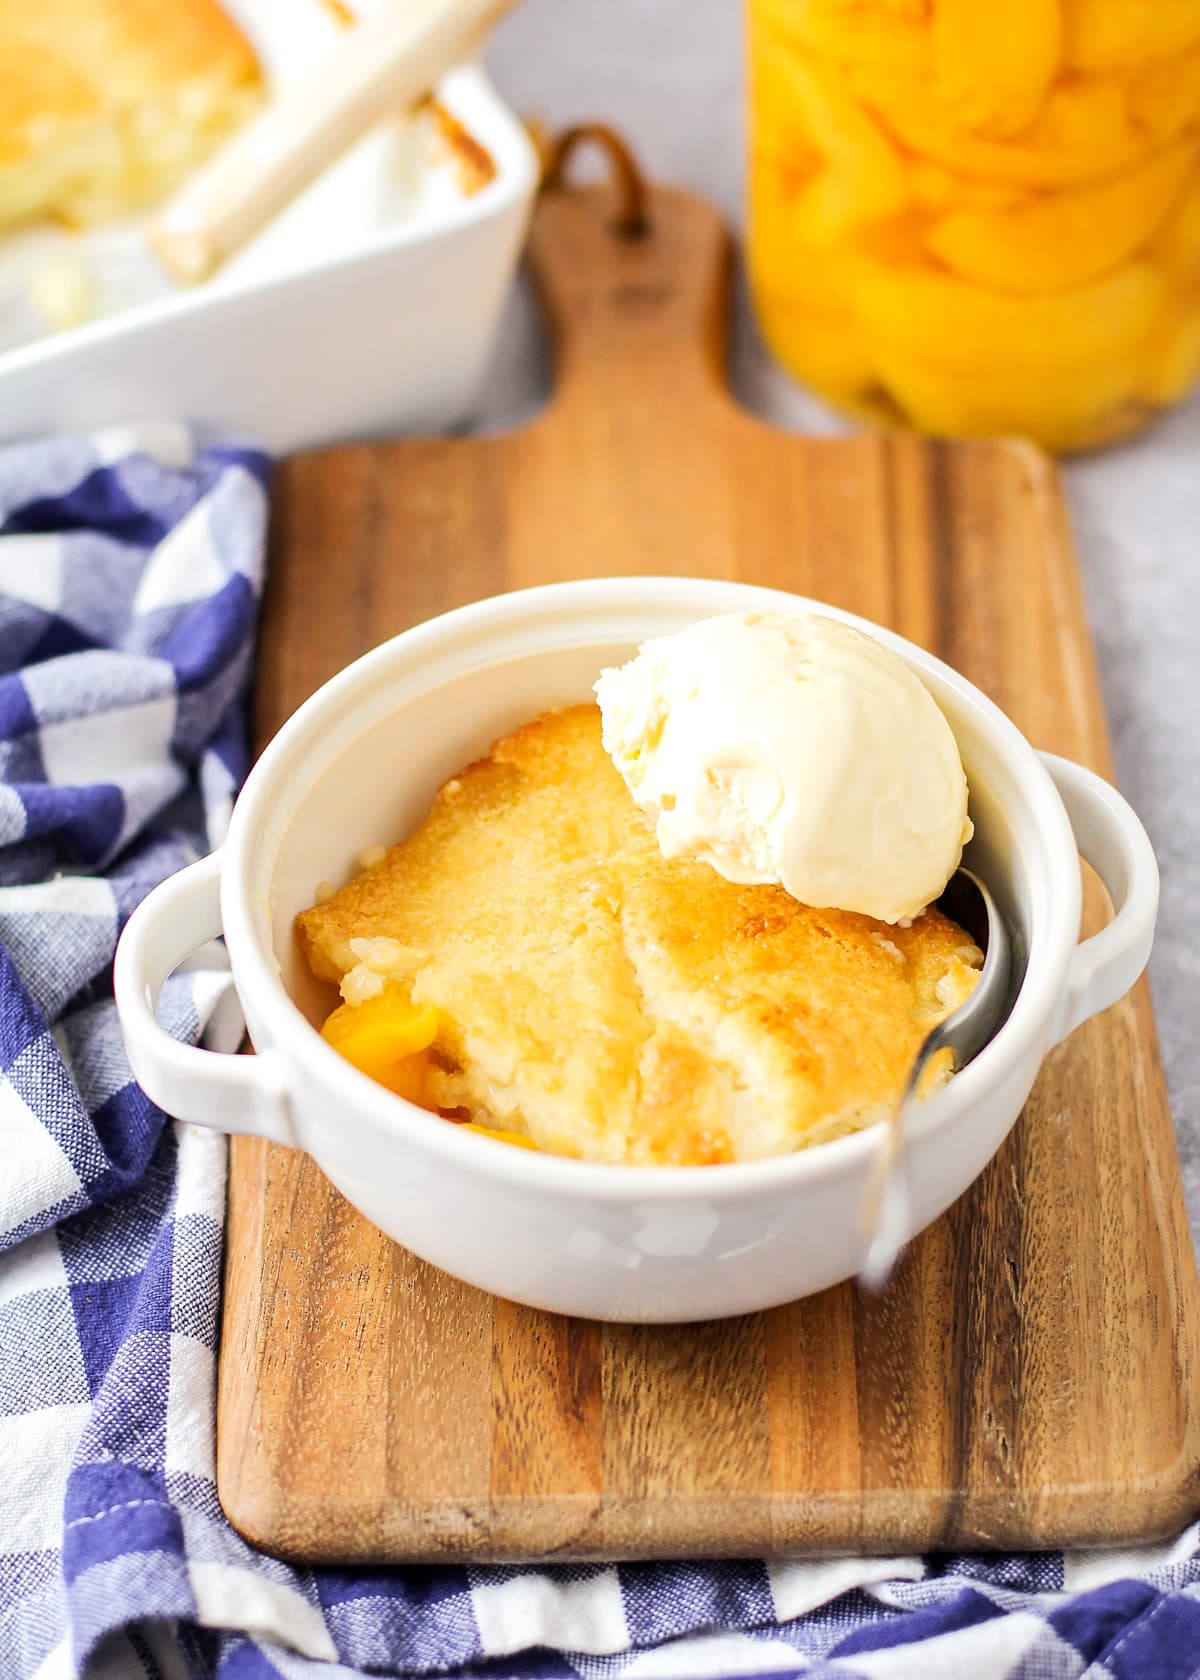 Blueberry cobbler - easy peach cobbler topped with vanilla ice cream.